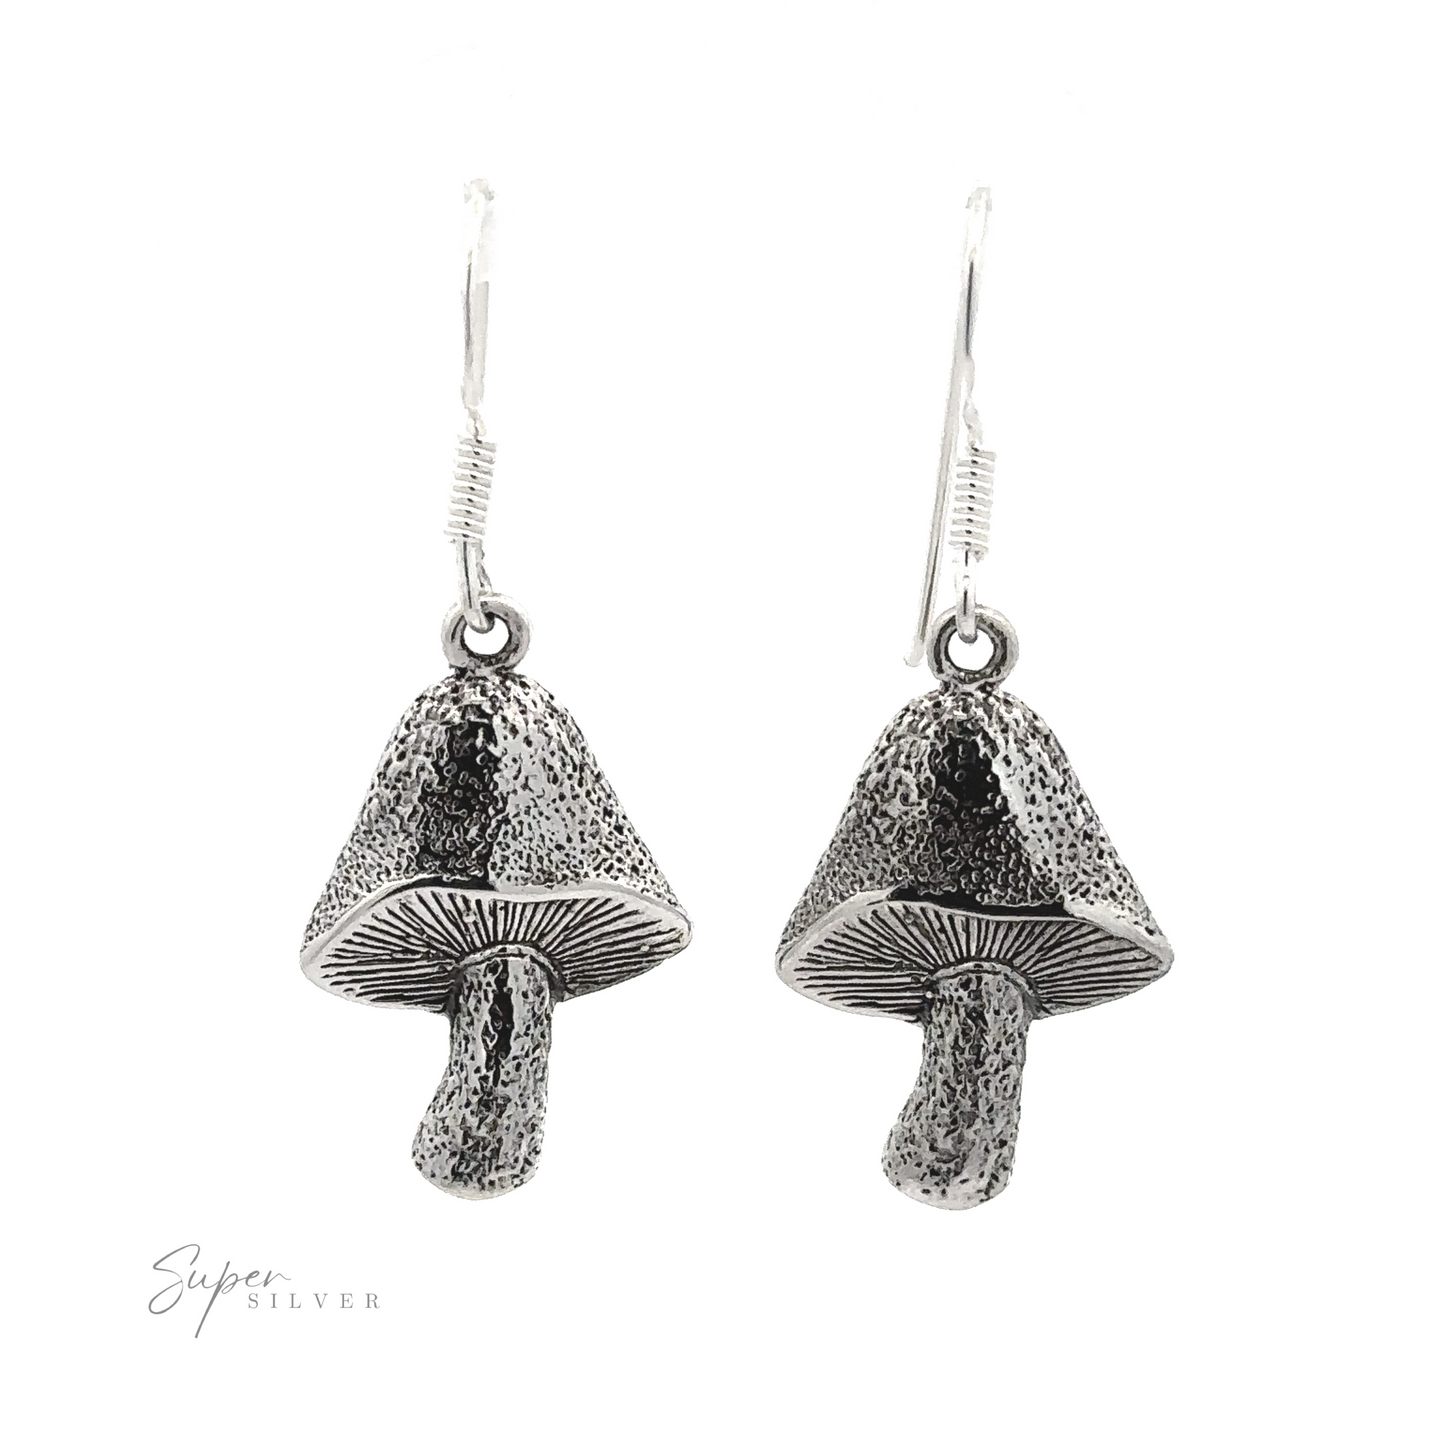 Textured Mushroom Earrings with textured details and an oxidized finish, dangling from hook-style fastenings against a white background.